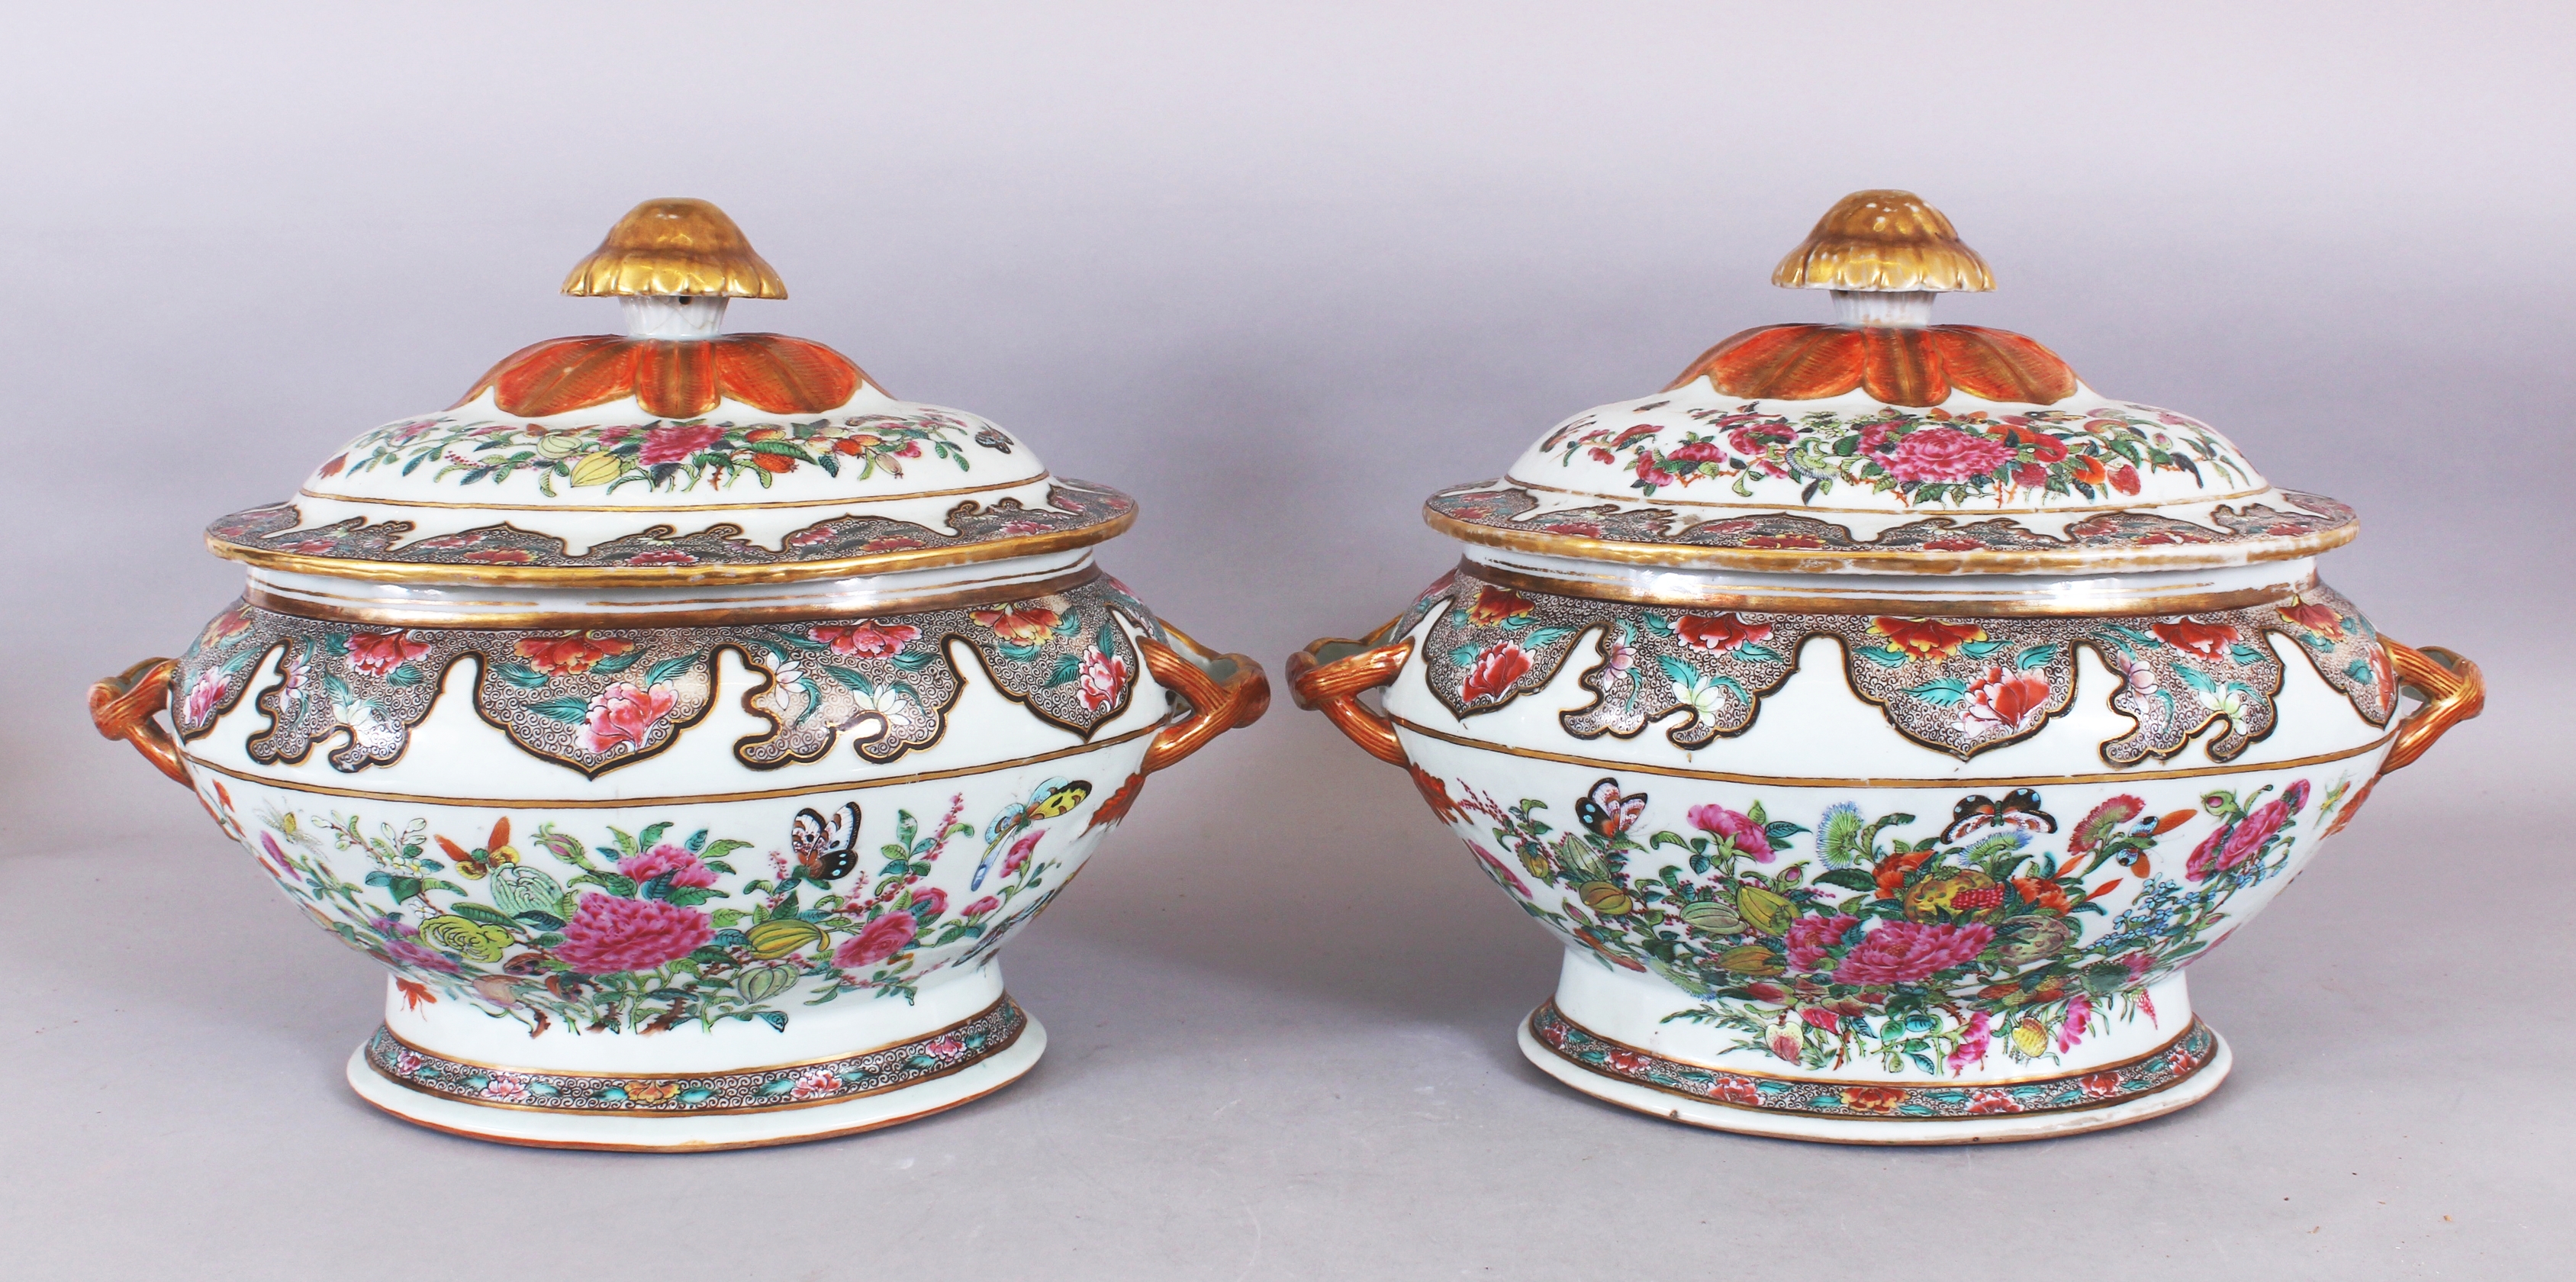 A GOOD PAIR OF EARLY/MID 19TH CENTURY CHINESE CANTON FAMILLE ROSE PORCELAIN TUREENS & COVERS, the